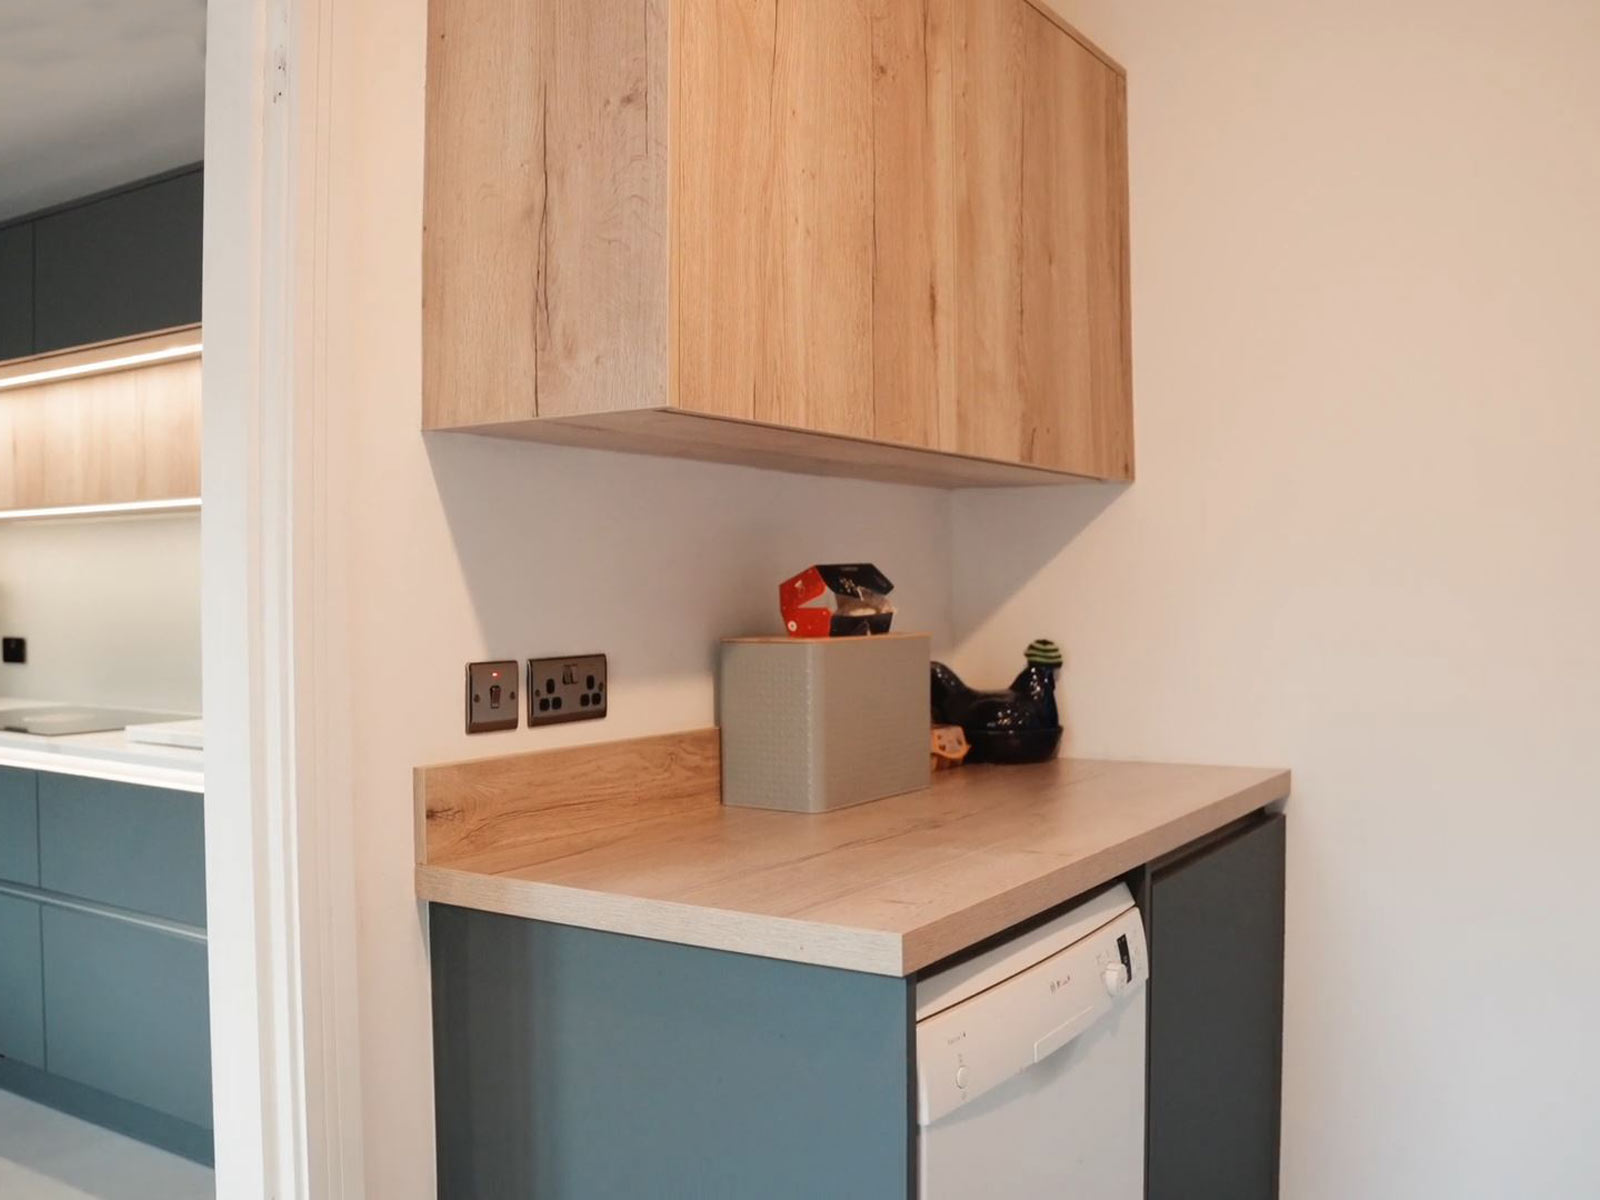 A utility room counter used as a kitchen work surface alongside wall cupboards